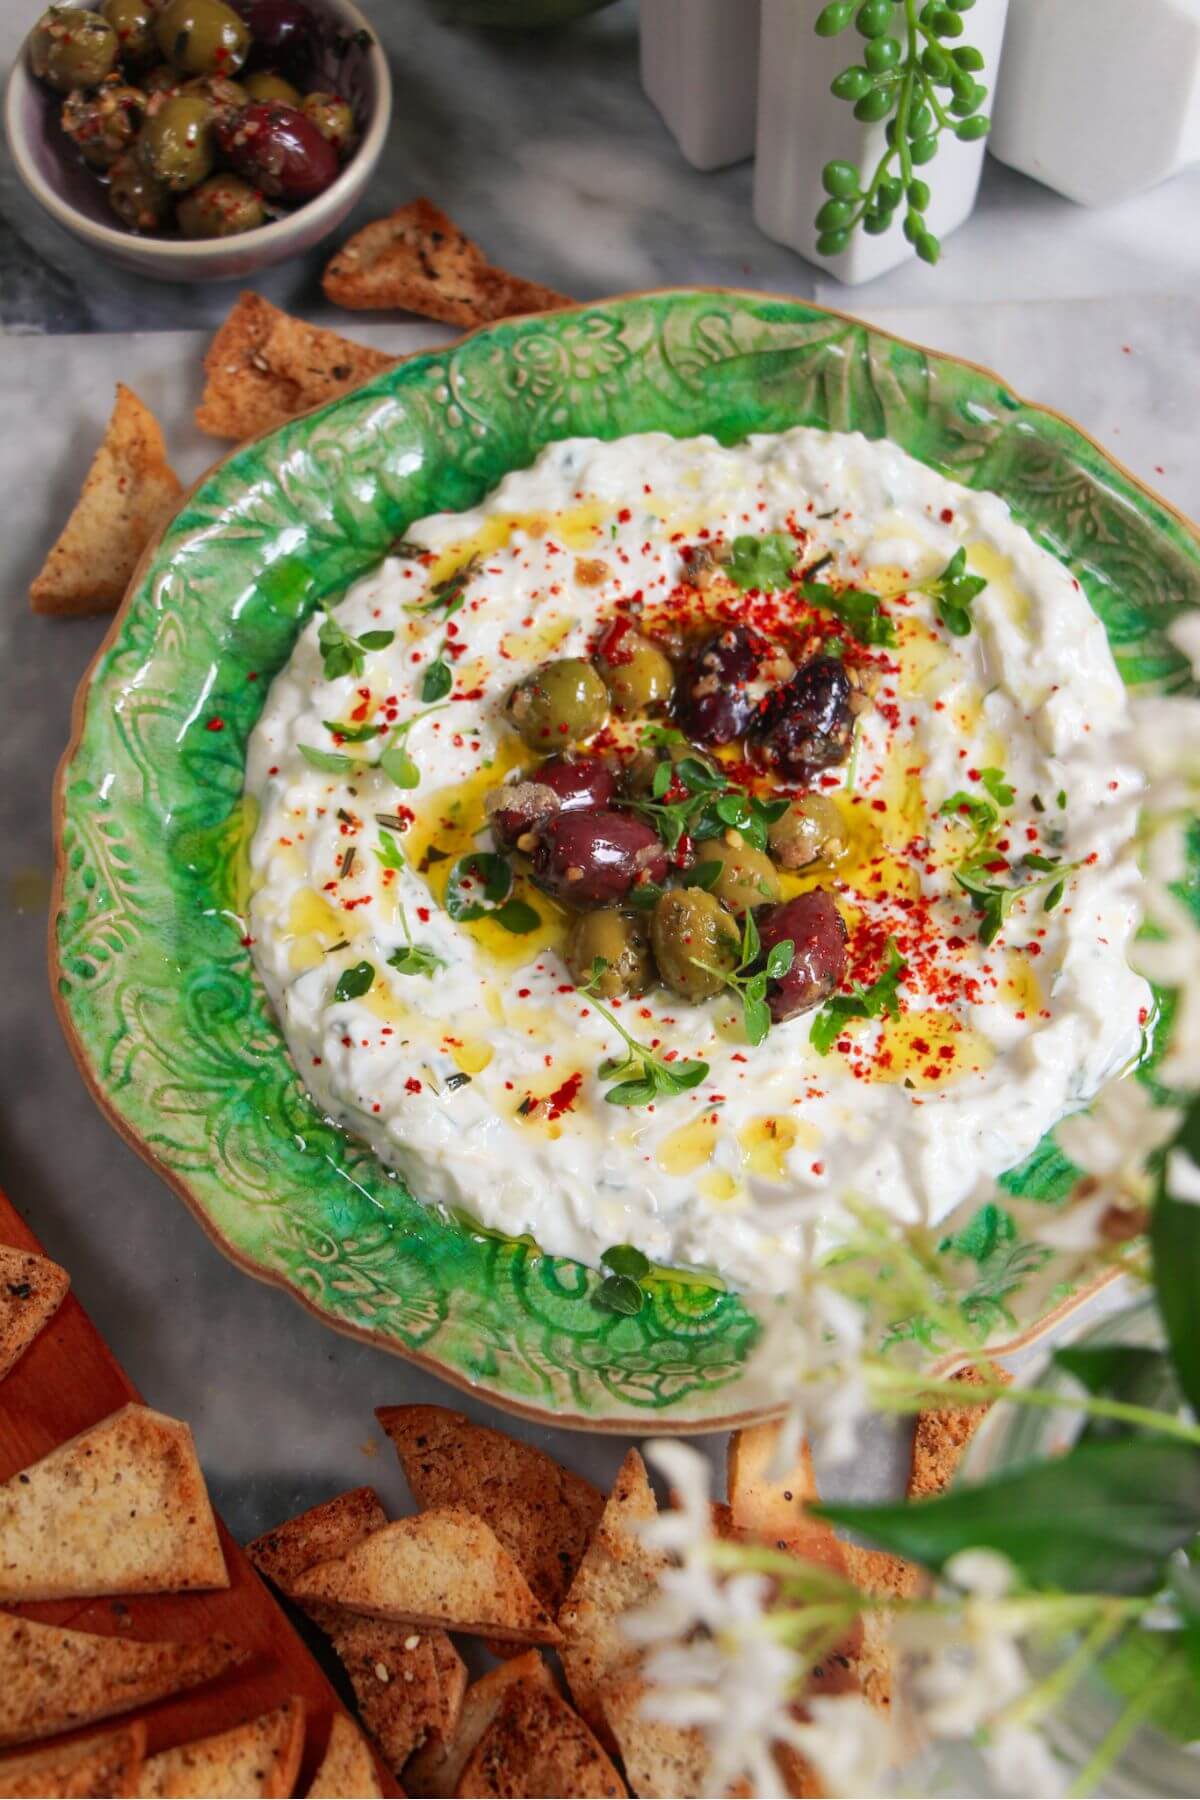 Tzatziki sauce spread onto a small green serving plate, topped with marinated olives with pita chips on the side.